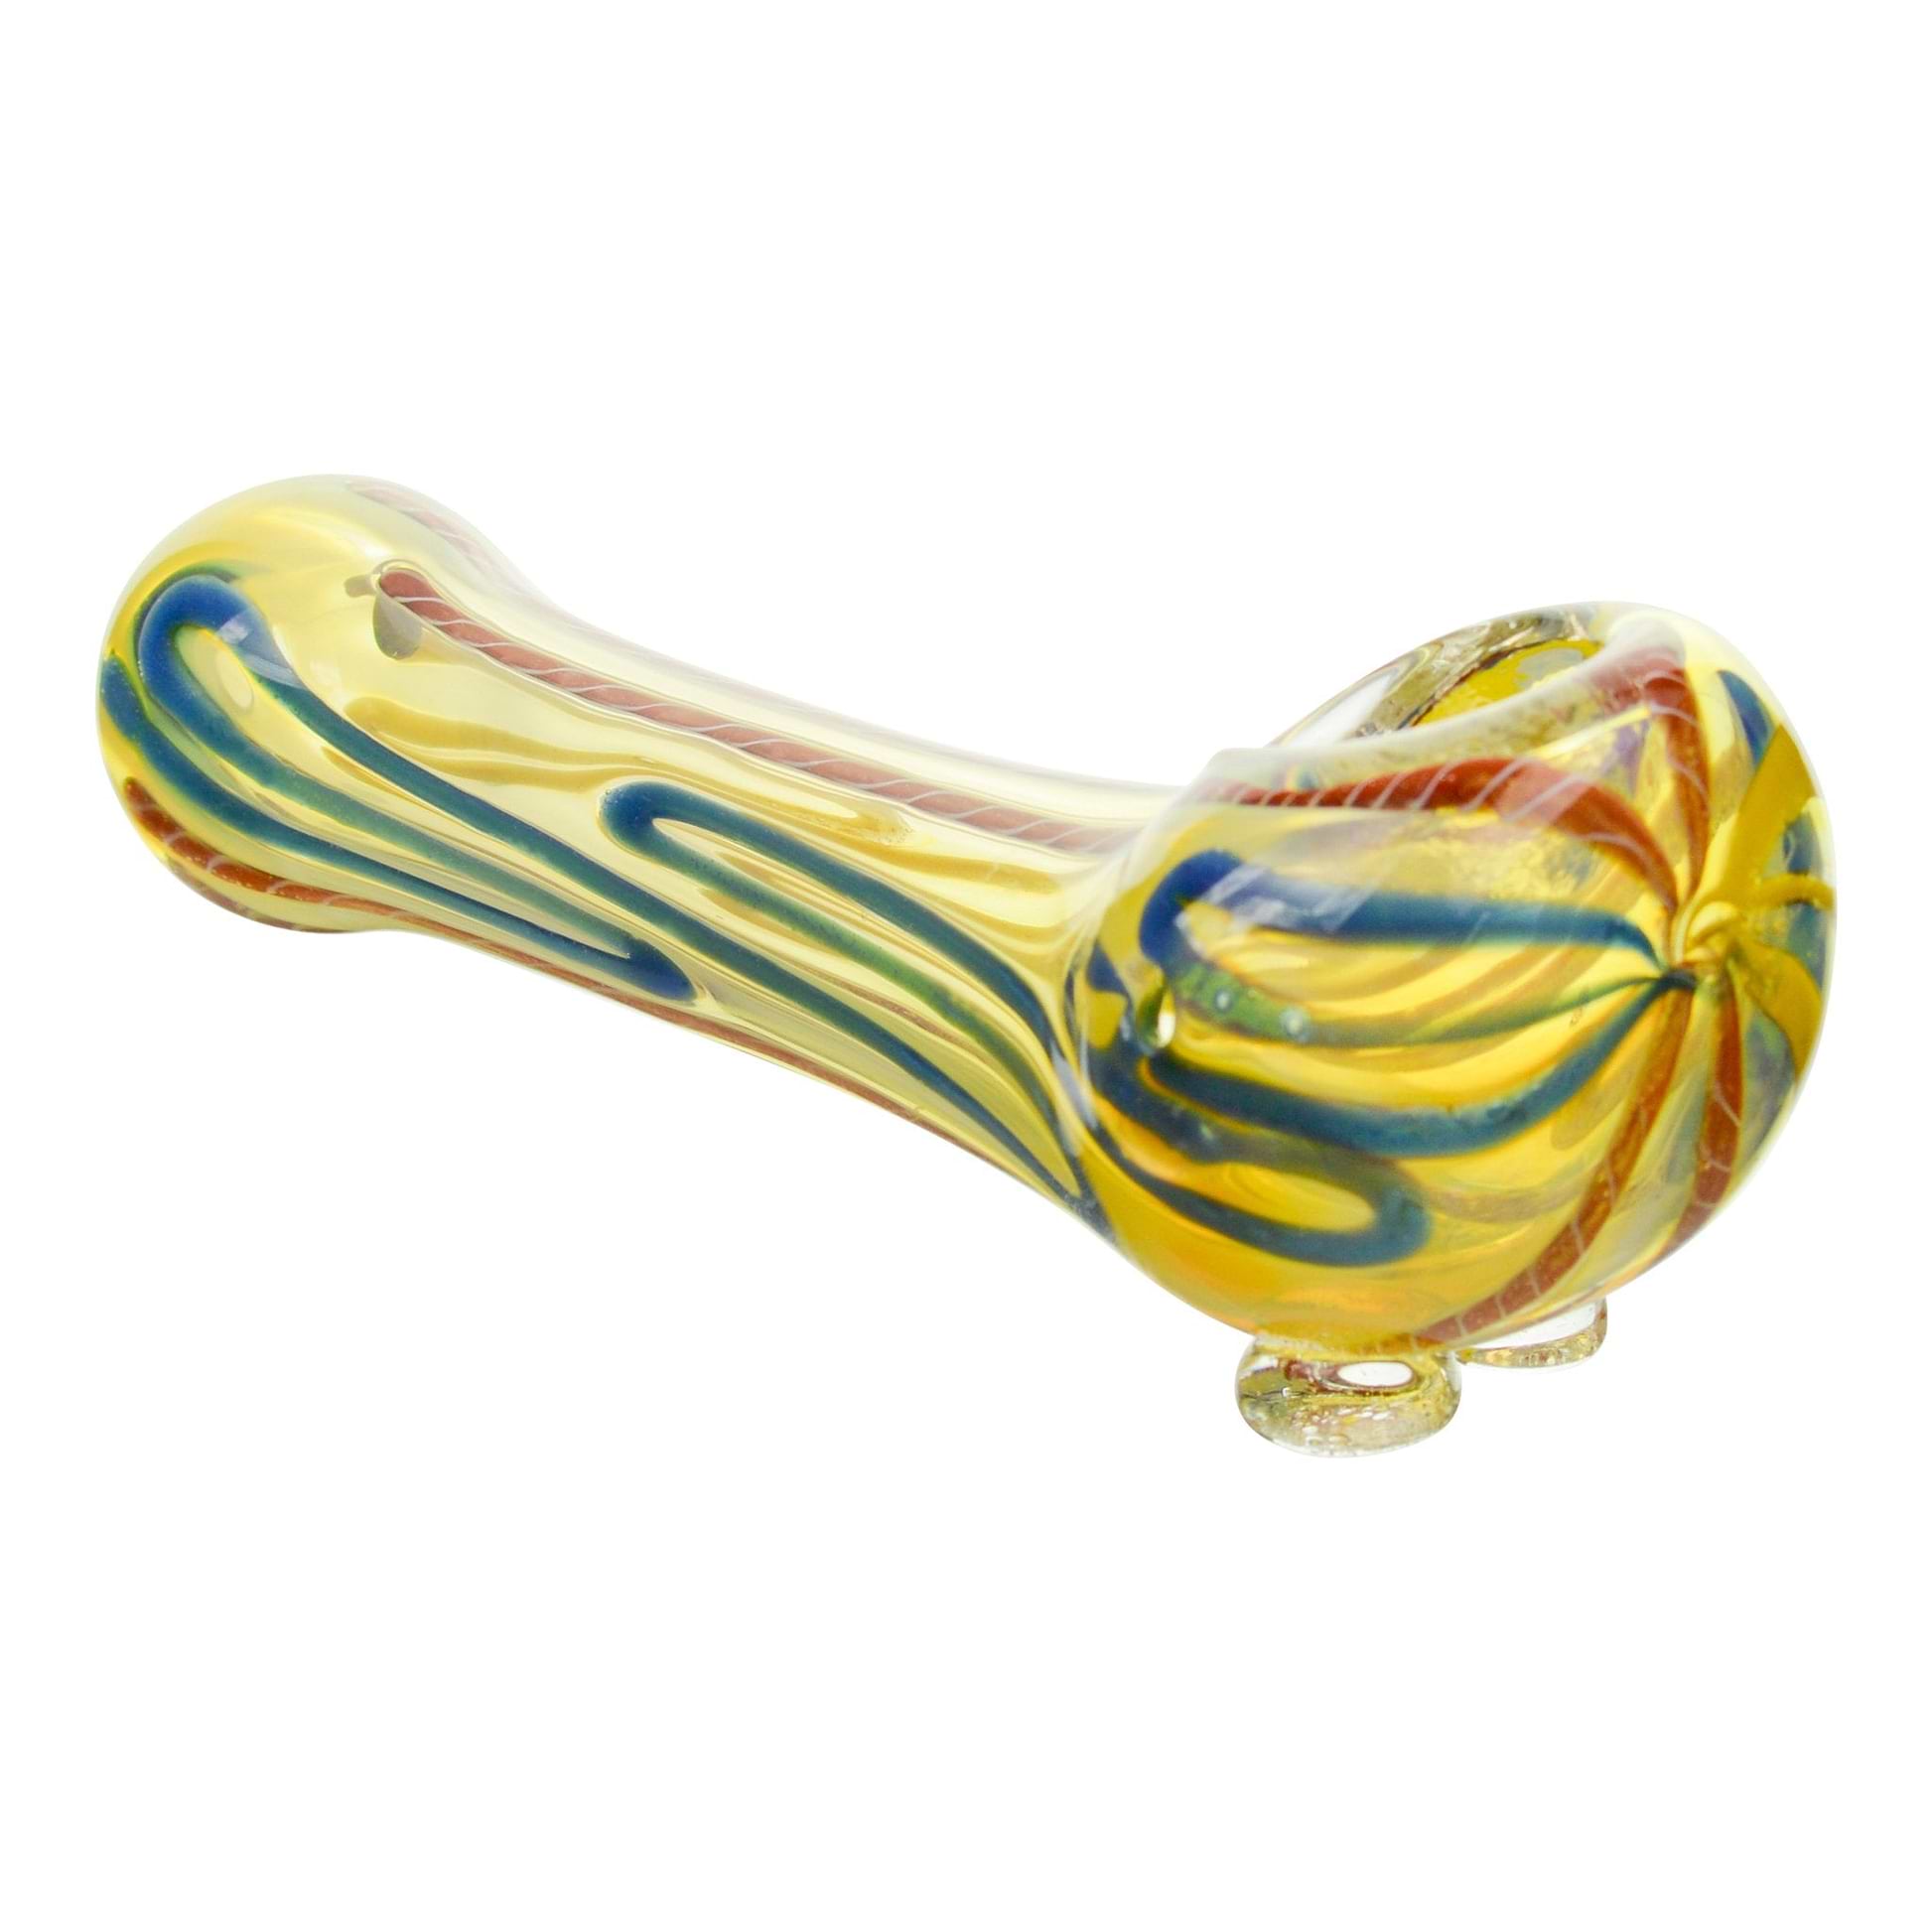 Multiple Colored Hand Pipe - 5in